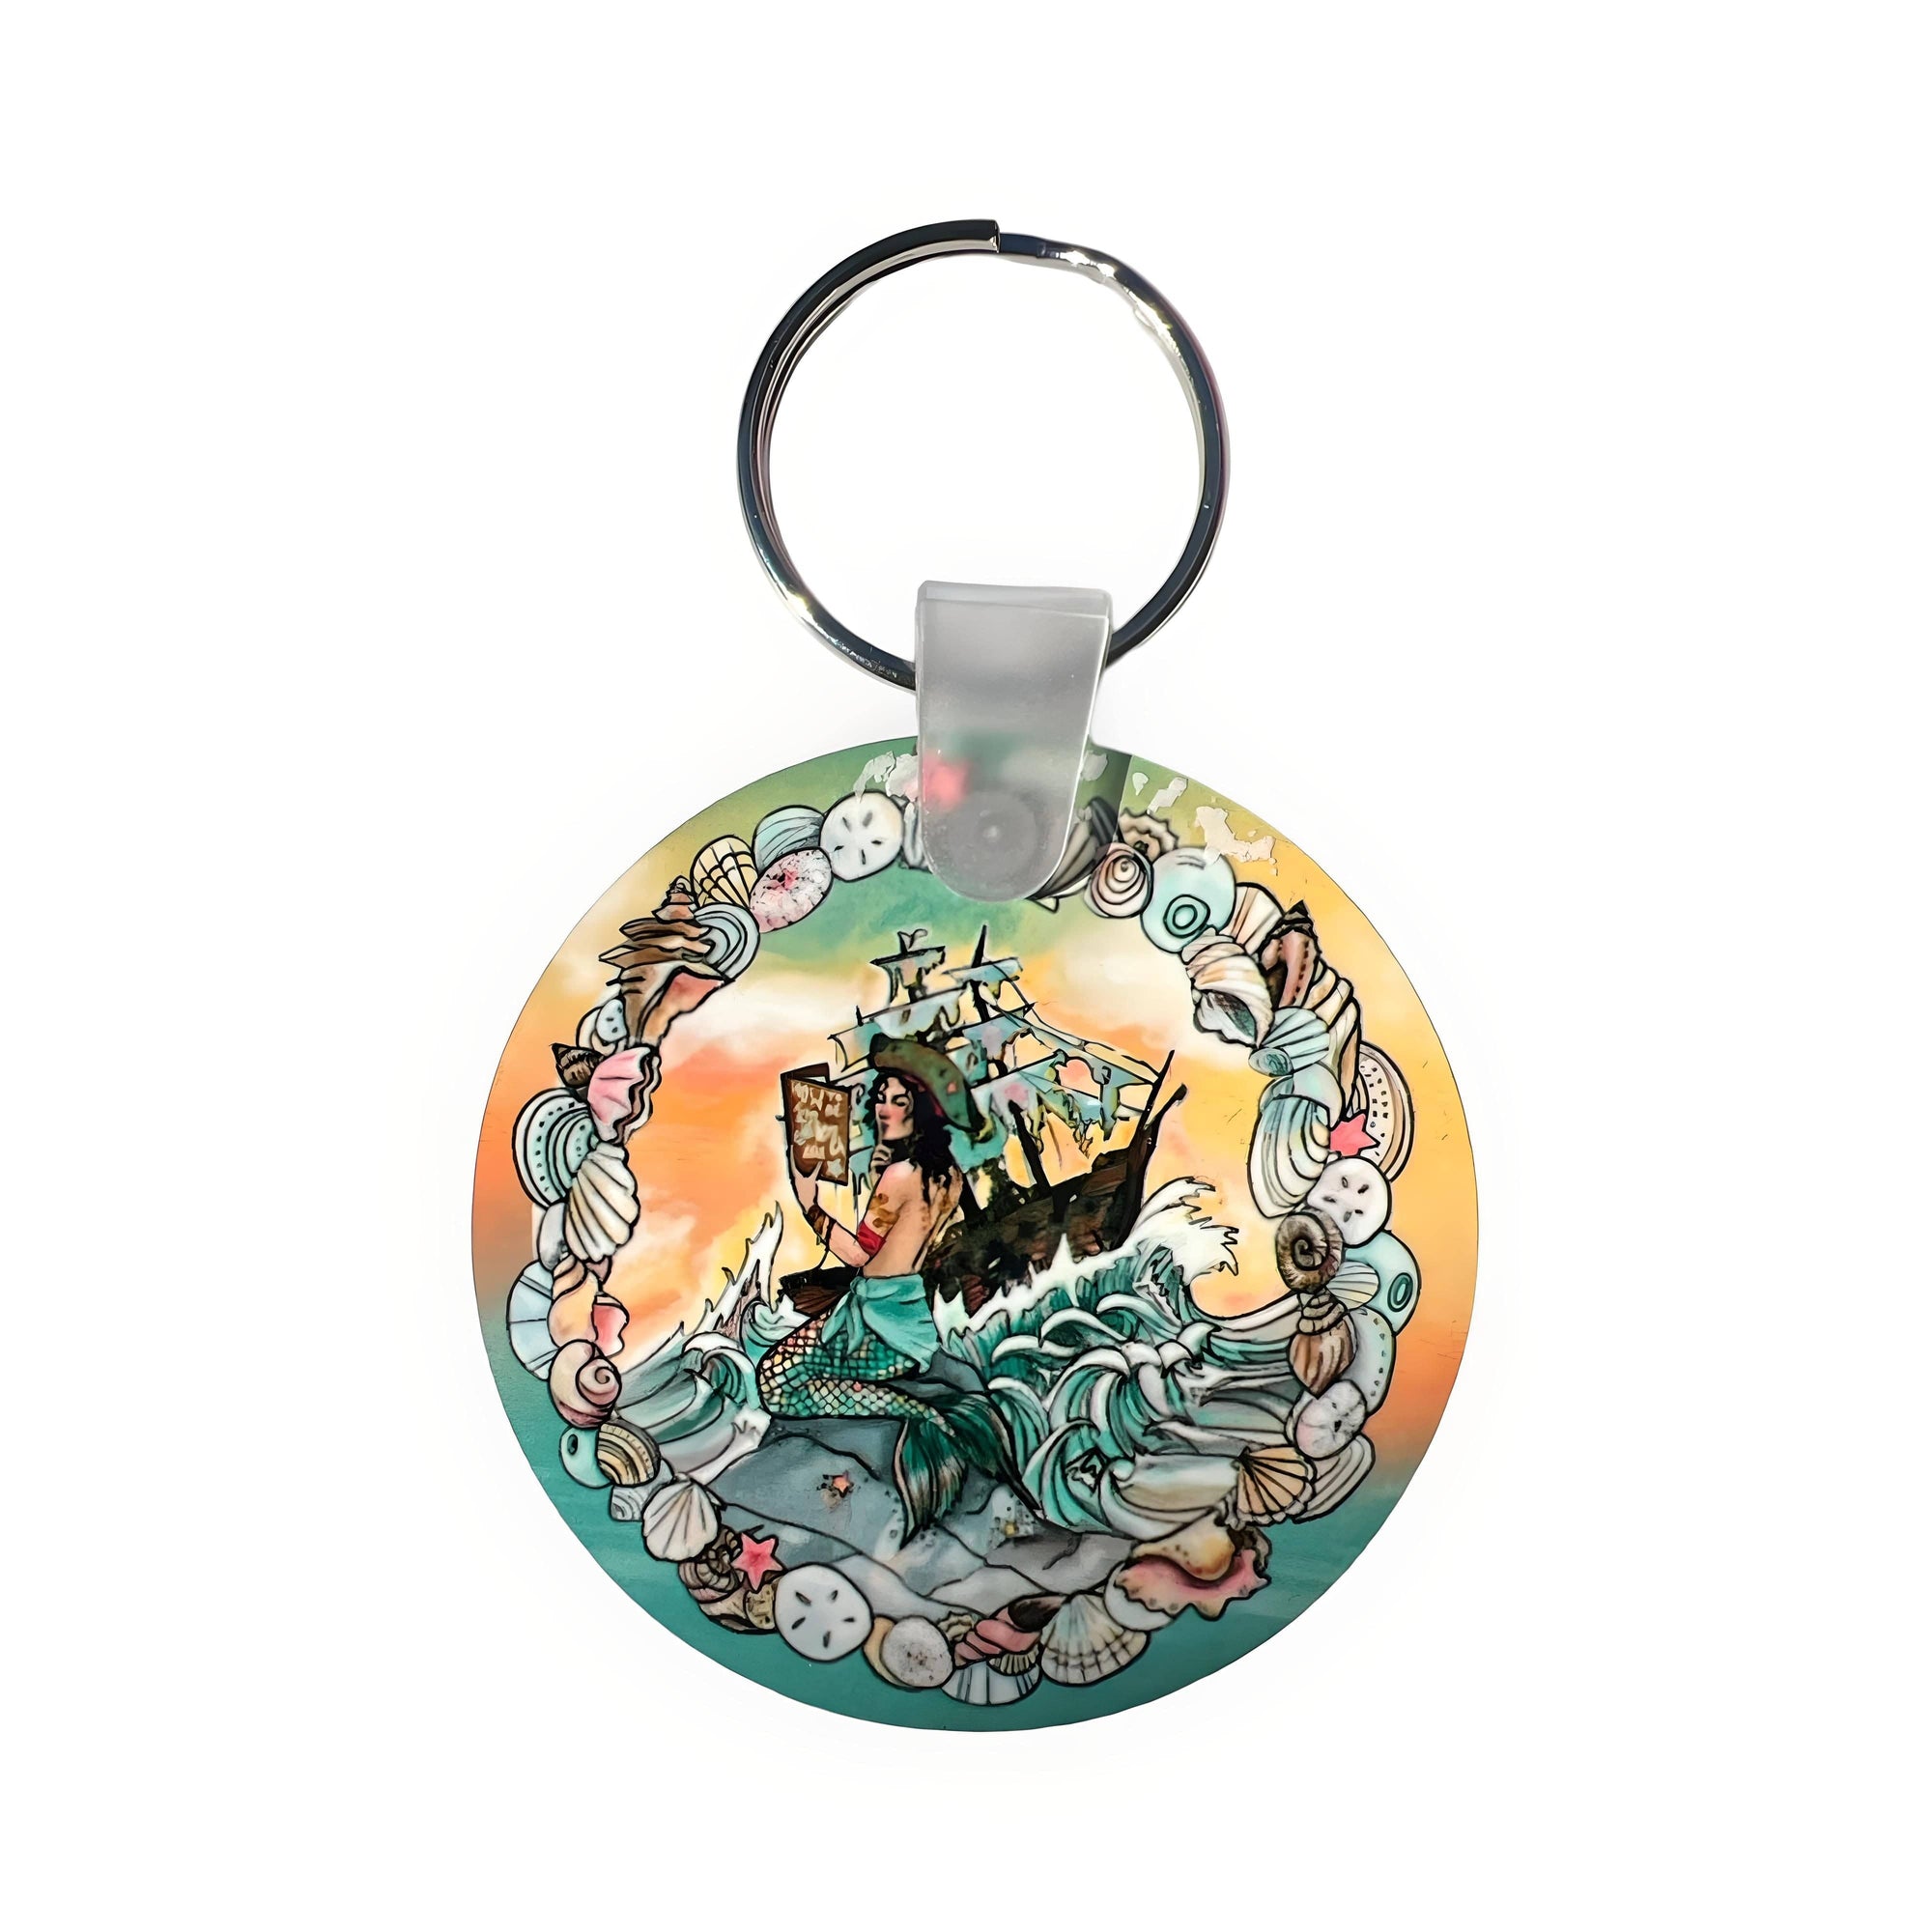 How To Be A Siren 101 Keychain - Mountains & Mermaids